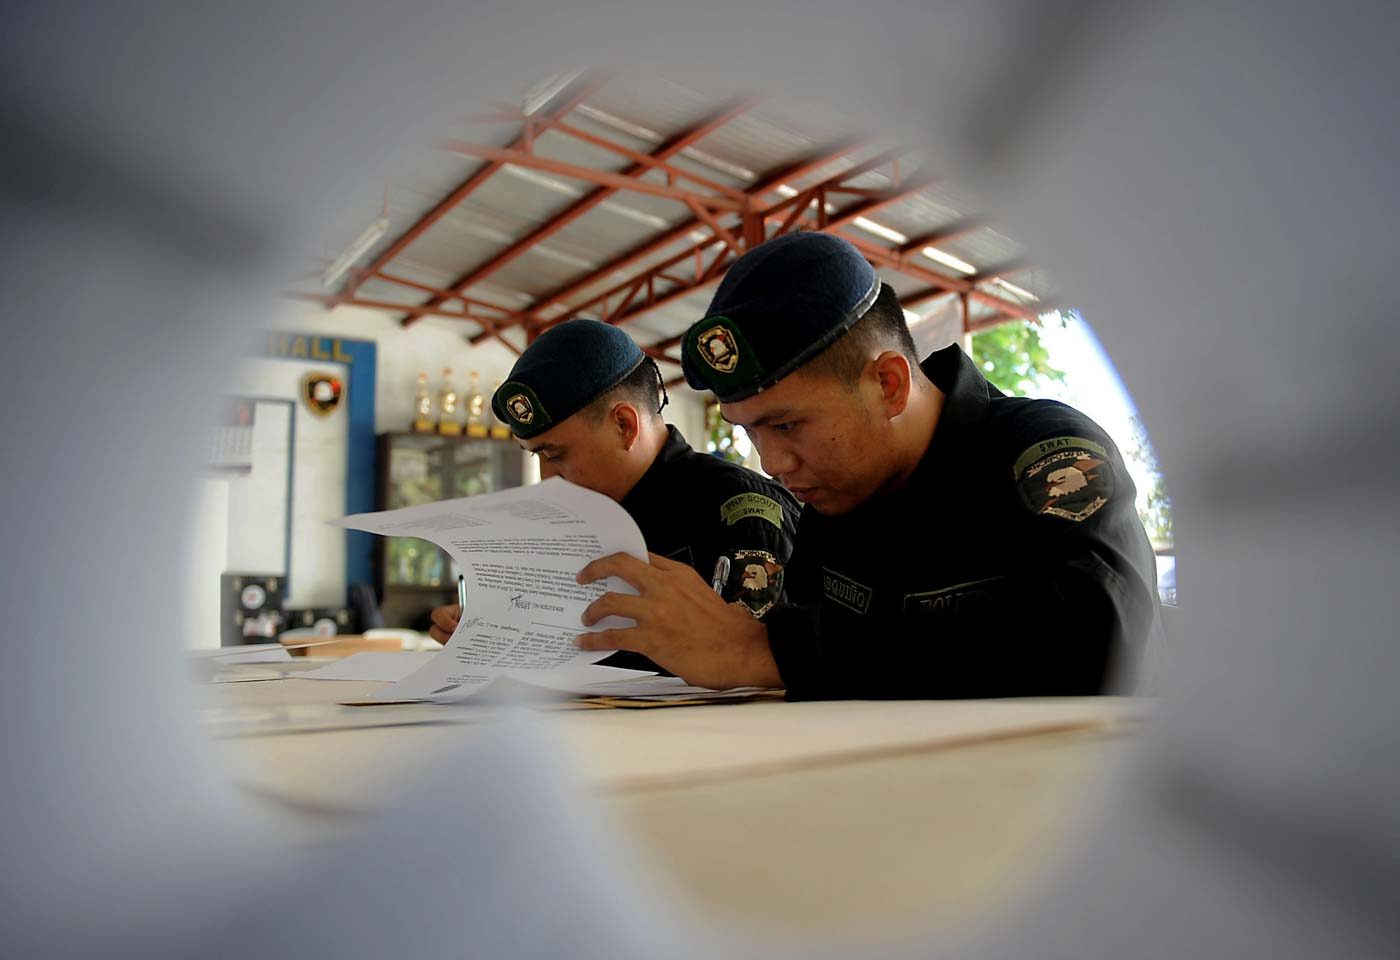 VOTING. Members of the Philippine National Police queue as they exercise their right to vote during the start of the local absentee voting at the NCRPO headquarters inside the Camp Bagong Diwa in Taguig City on Monday, April 29. Photo by Ben Nabong/Rappler 